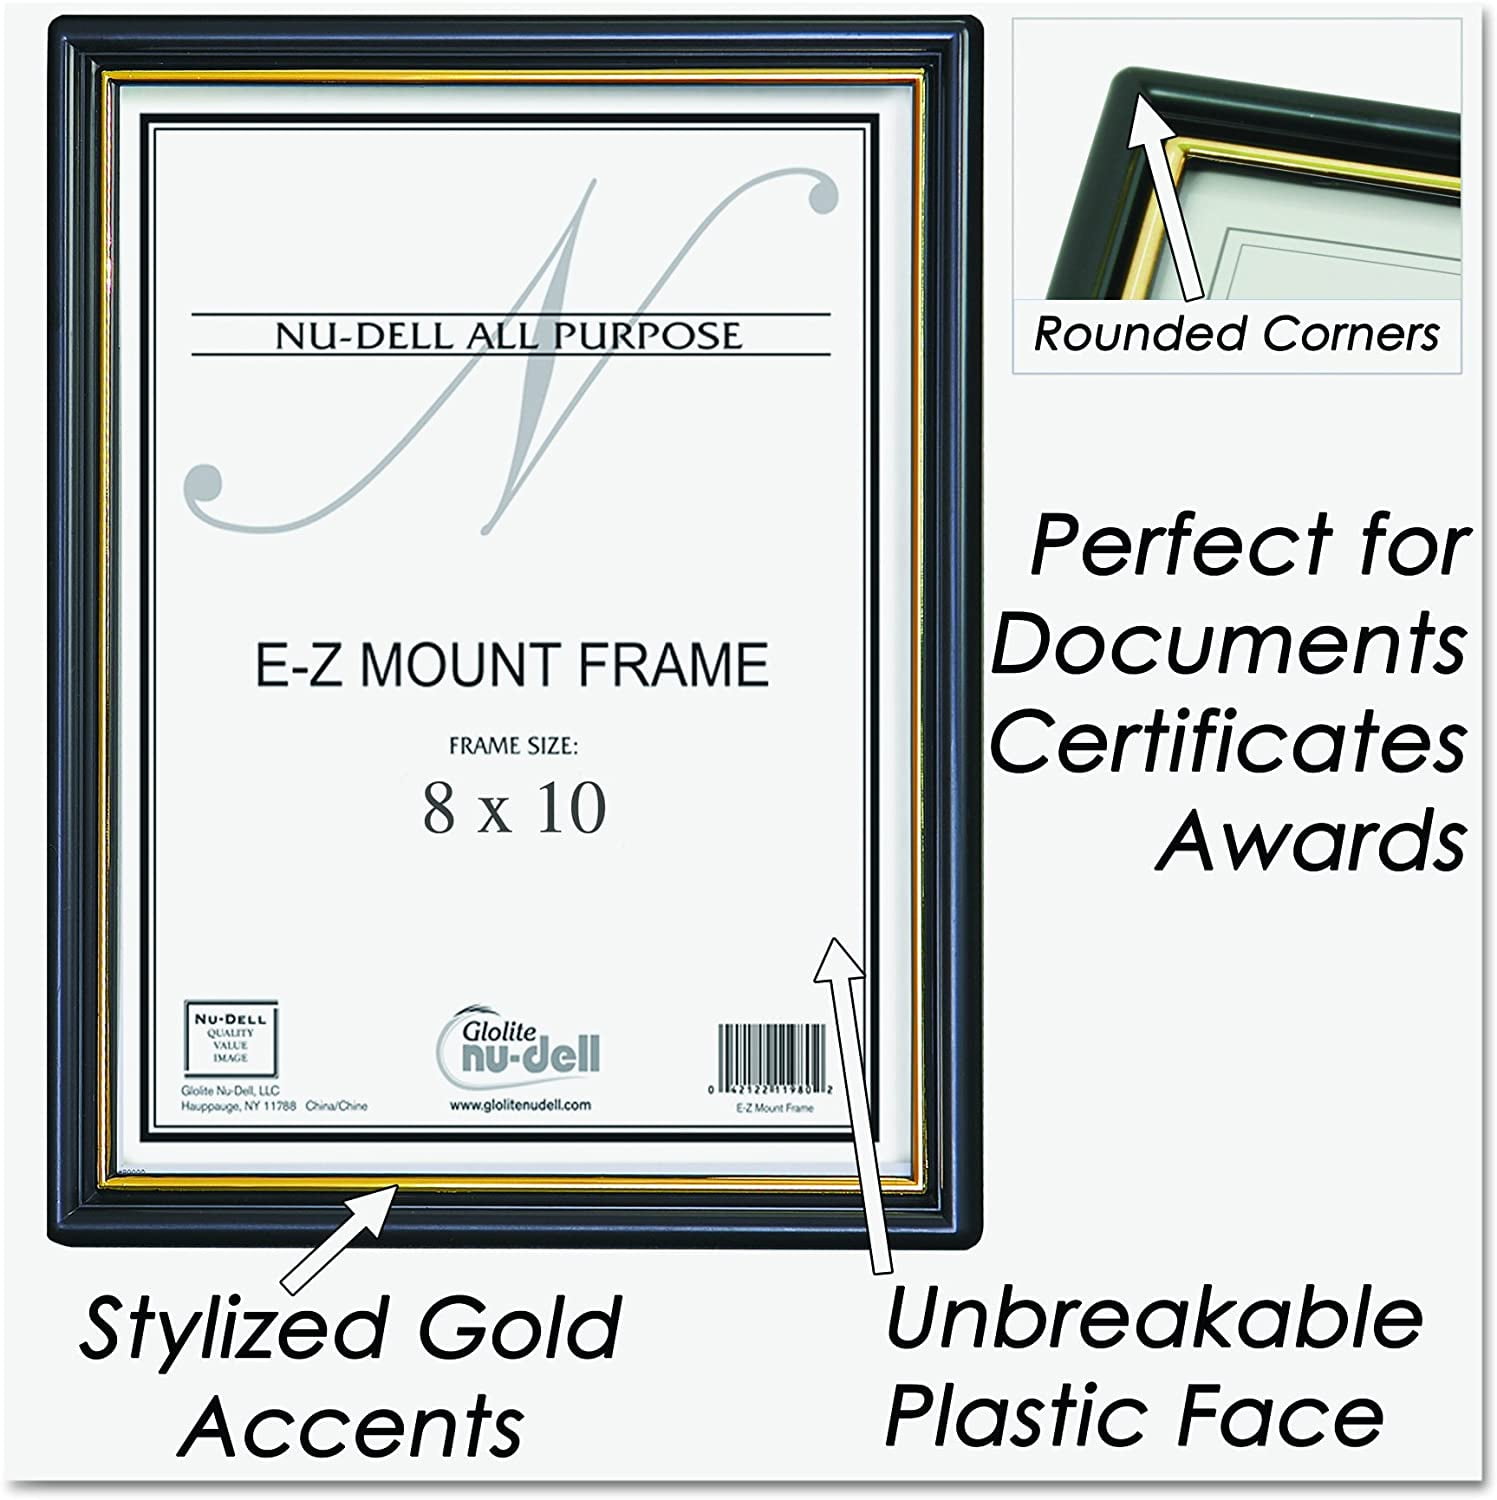 Black with Gold Trim Details about   NuDell 8 x 10 Inches EZ Mount Document Frame Plastic Face 